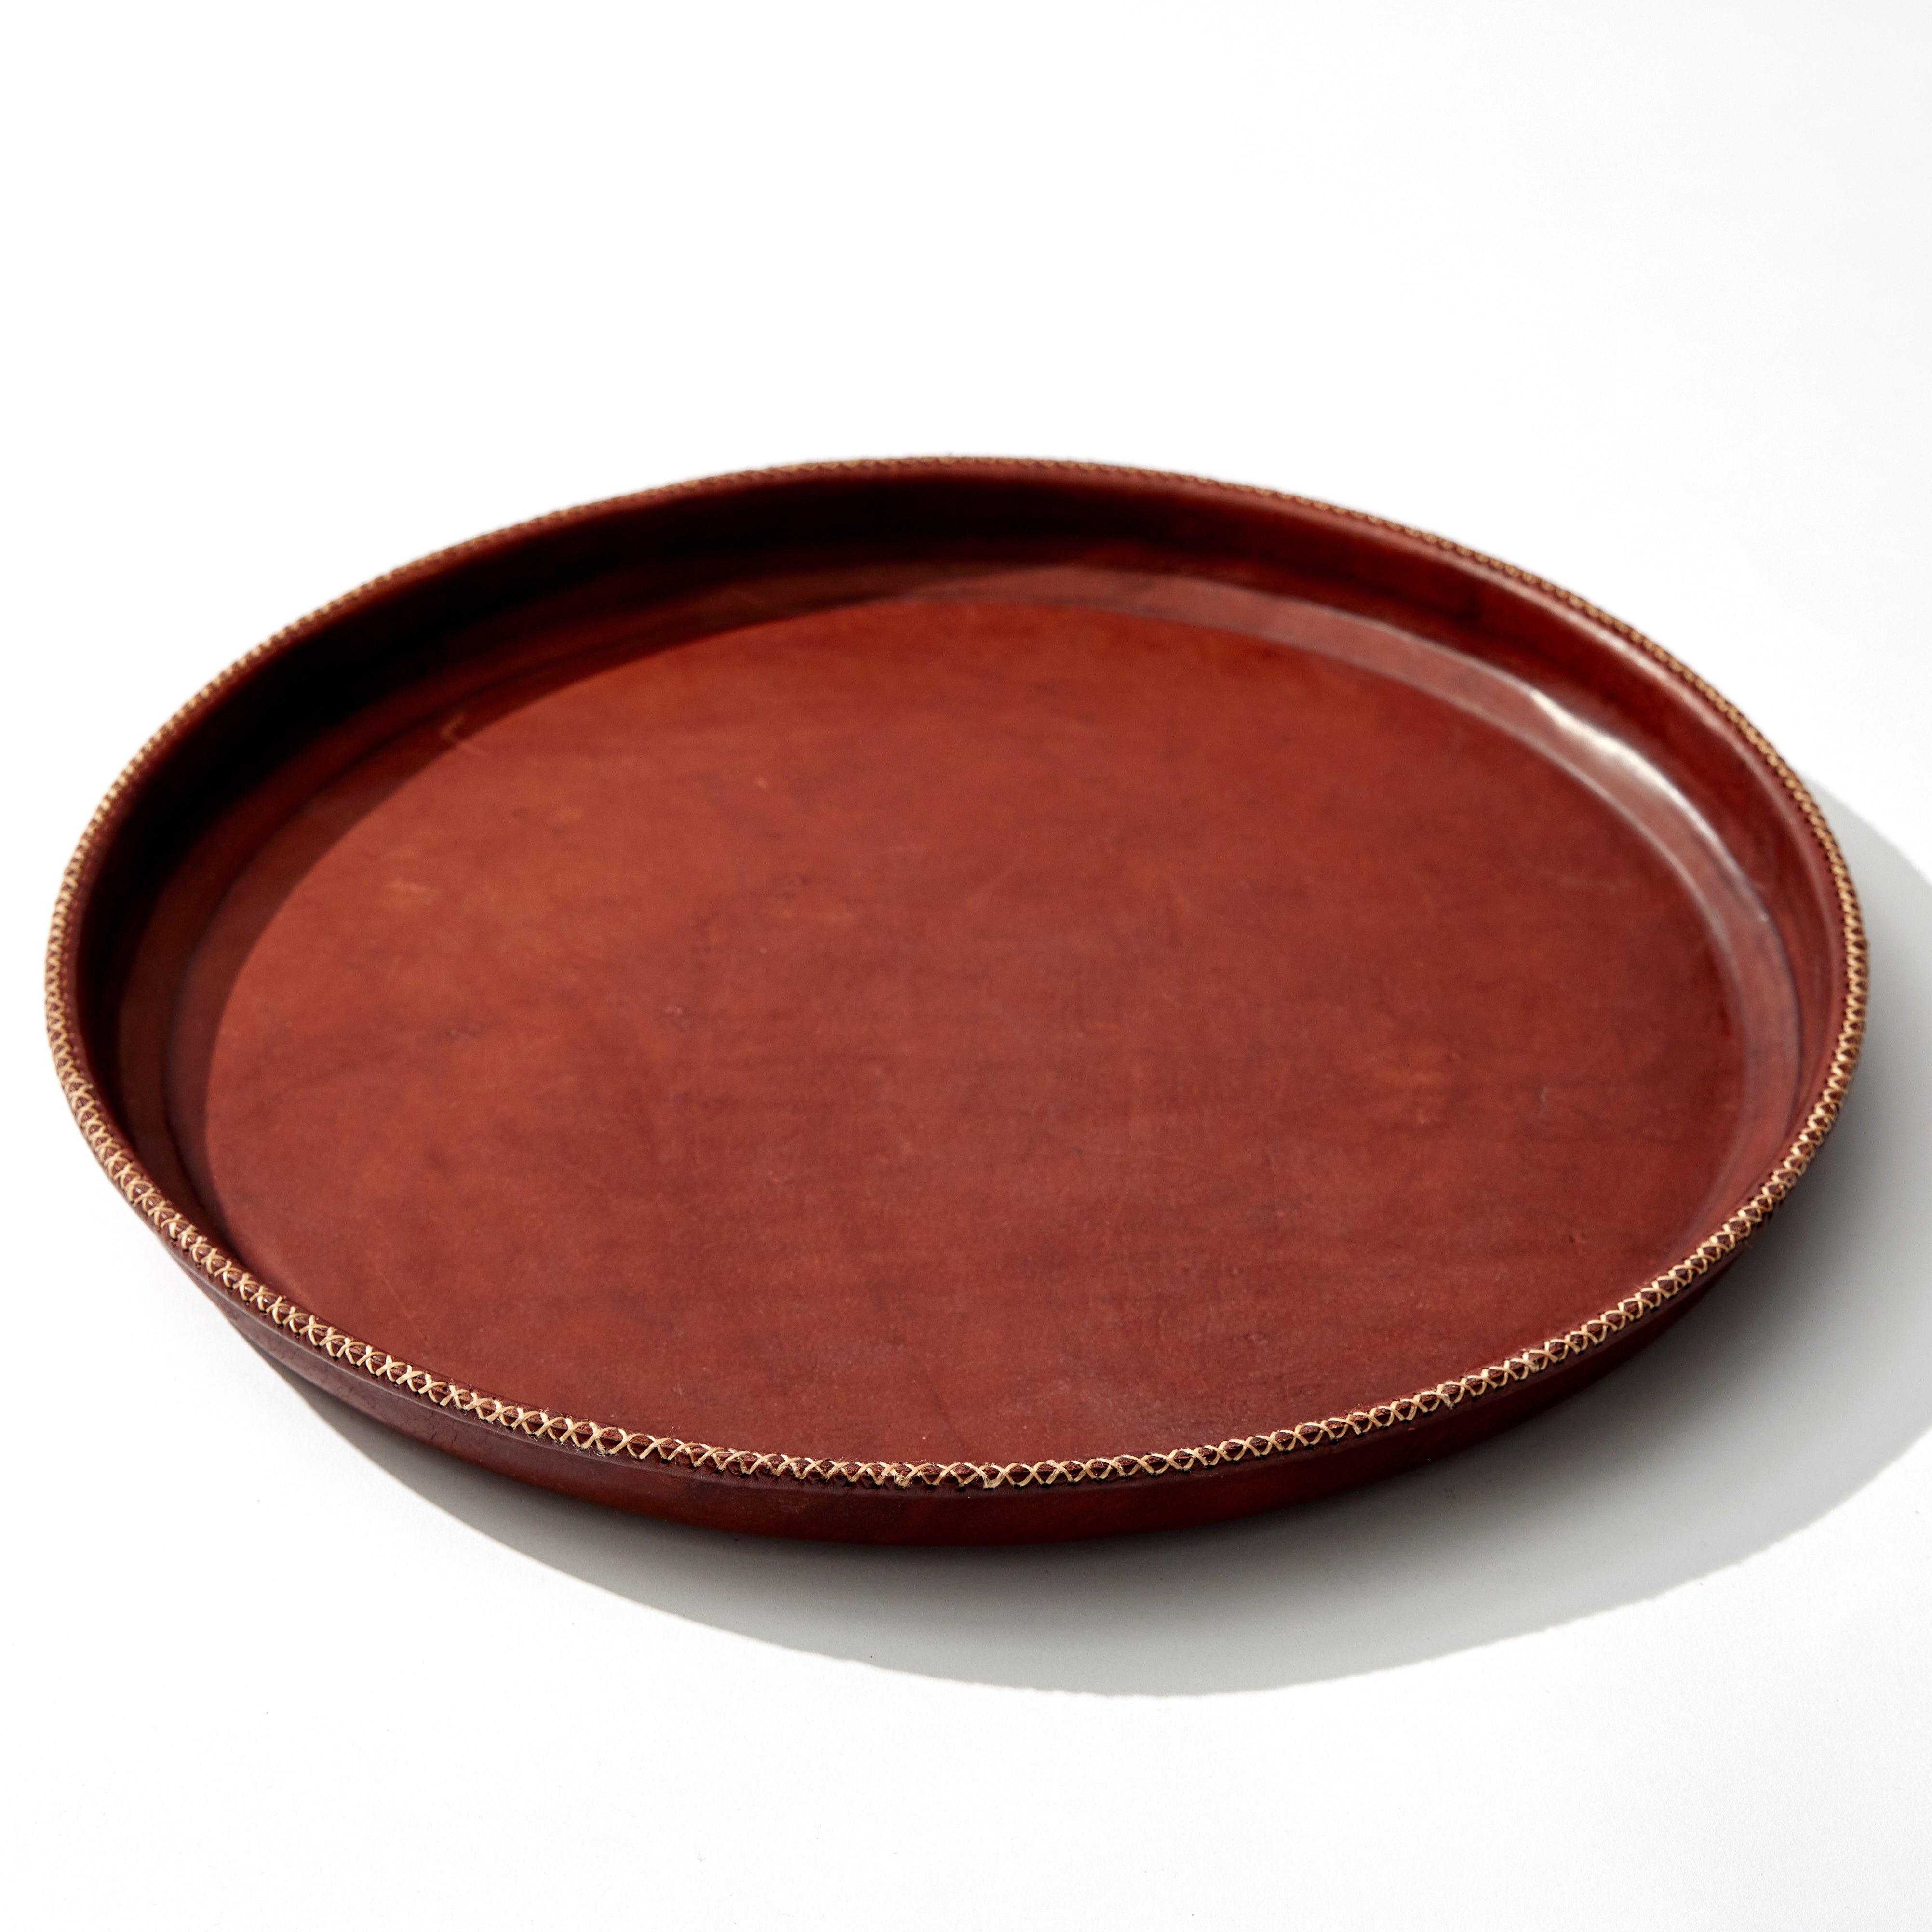 Large Brown Circular Leather Tray with White Hand Stitched Detailing. Angled Shot Of Tray.